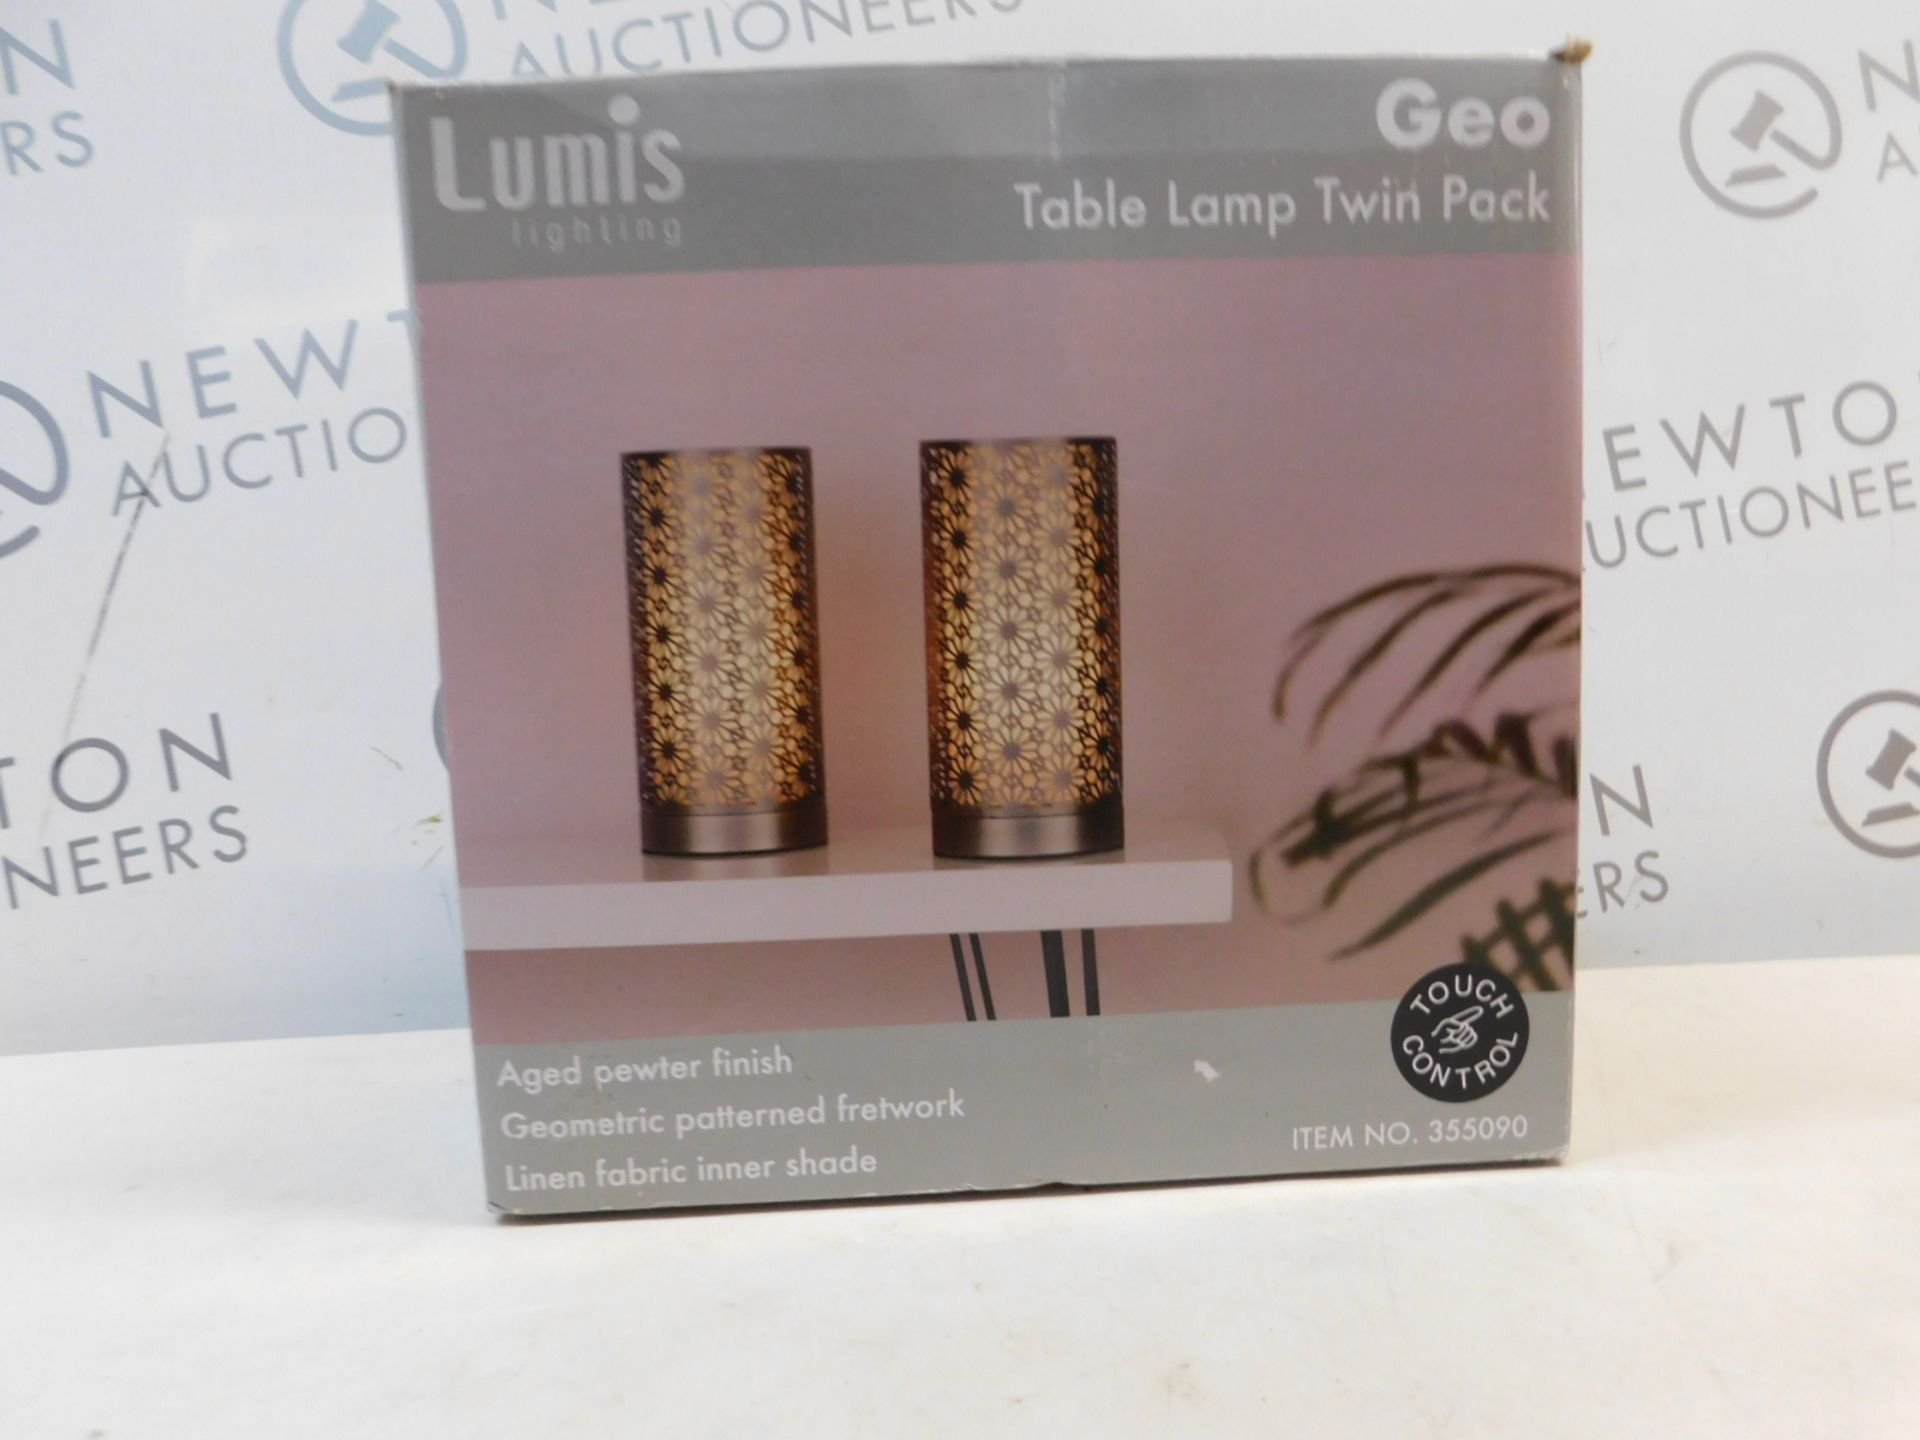 1 BOXED LUMIS LIGHTING GEO TOUCH TABLE LAMP 2 PACK RRP Â£69